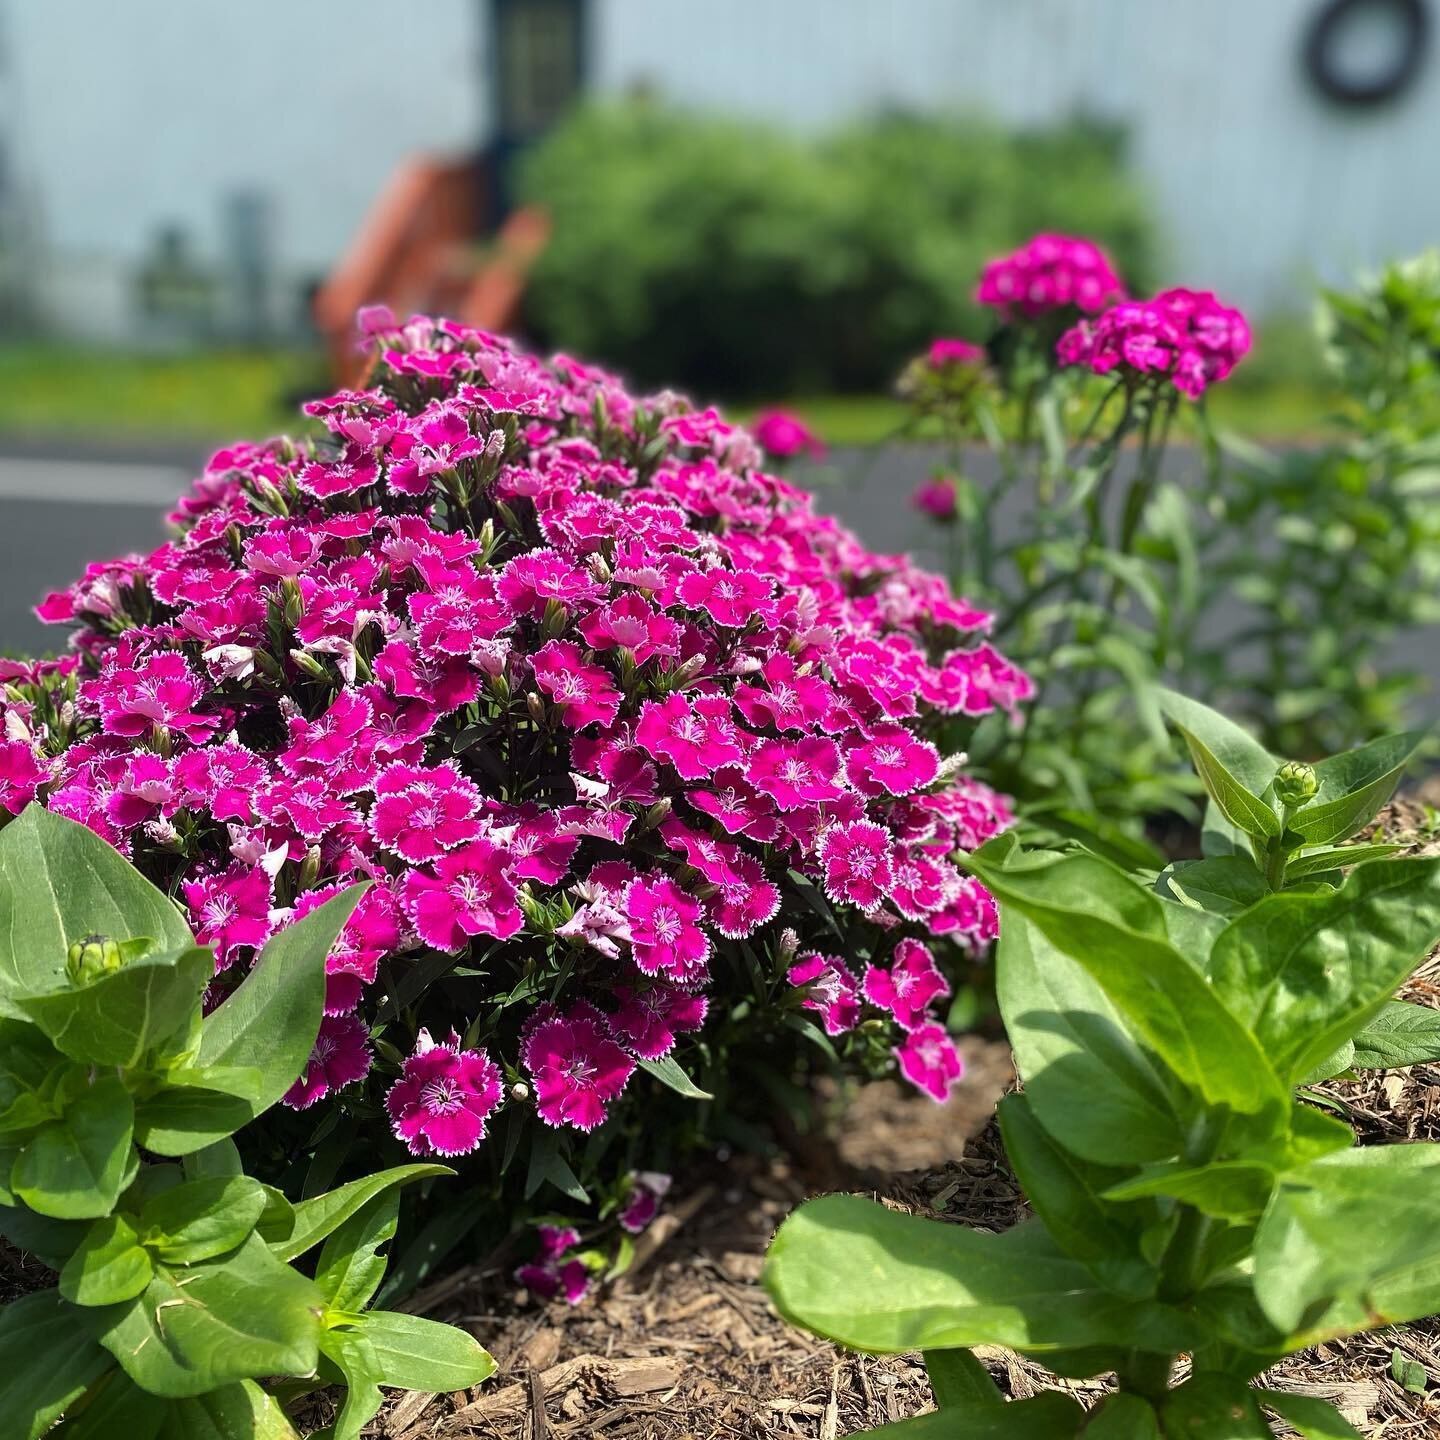 Our dianthus (Sweet William) is coming up extra beautifully this year. Come visit and see all the blooms 🌺 

#perennials #farmflowers #deepcreek #retreat